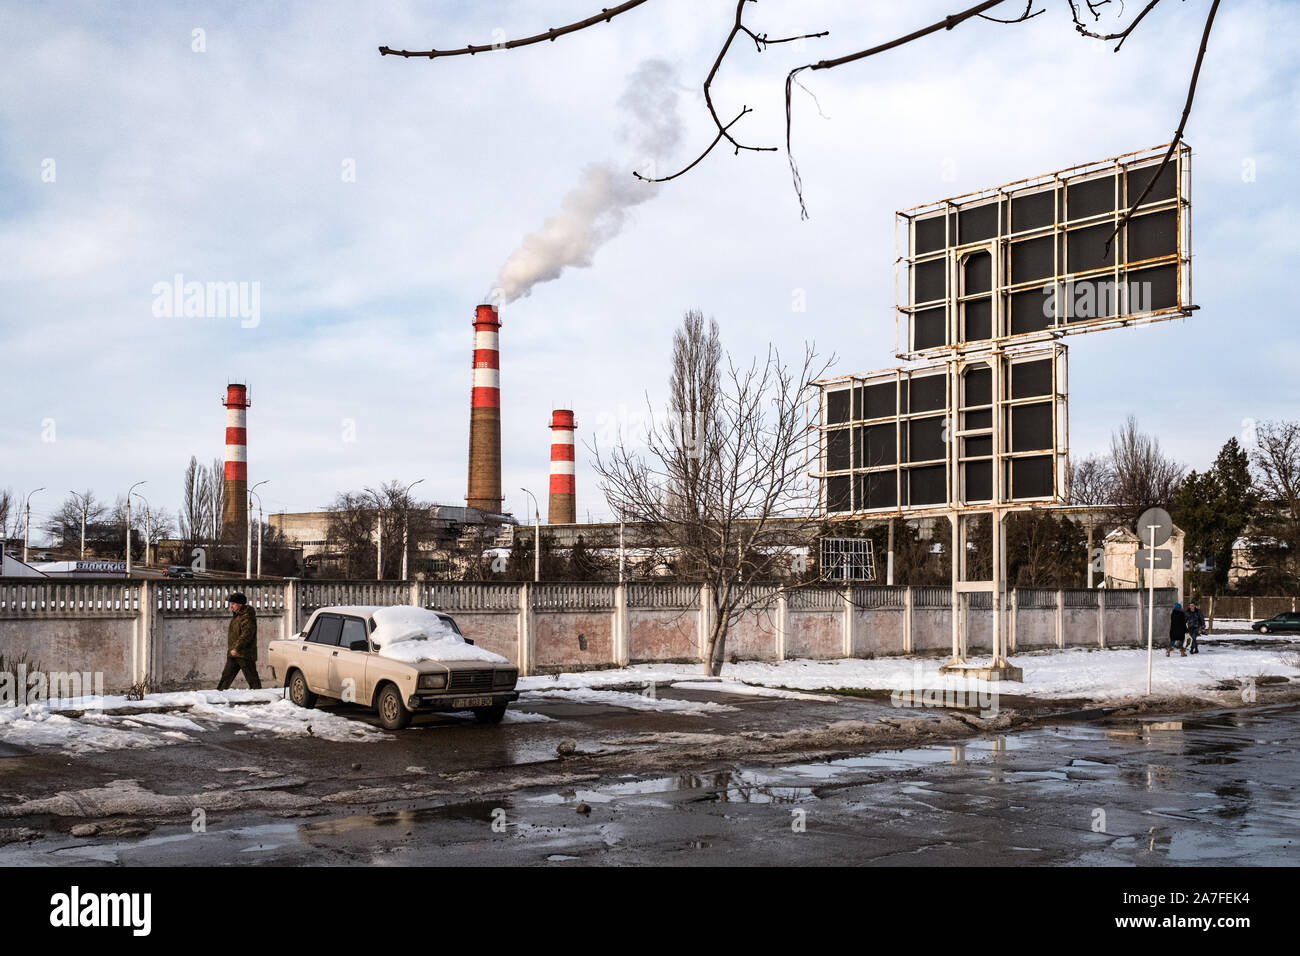 Winter time in Tiraspol the capital of Pridnestrovie or Transnistria. In the distance a water heating chimney can be seen bellowing smoke. Stock Photo